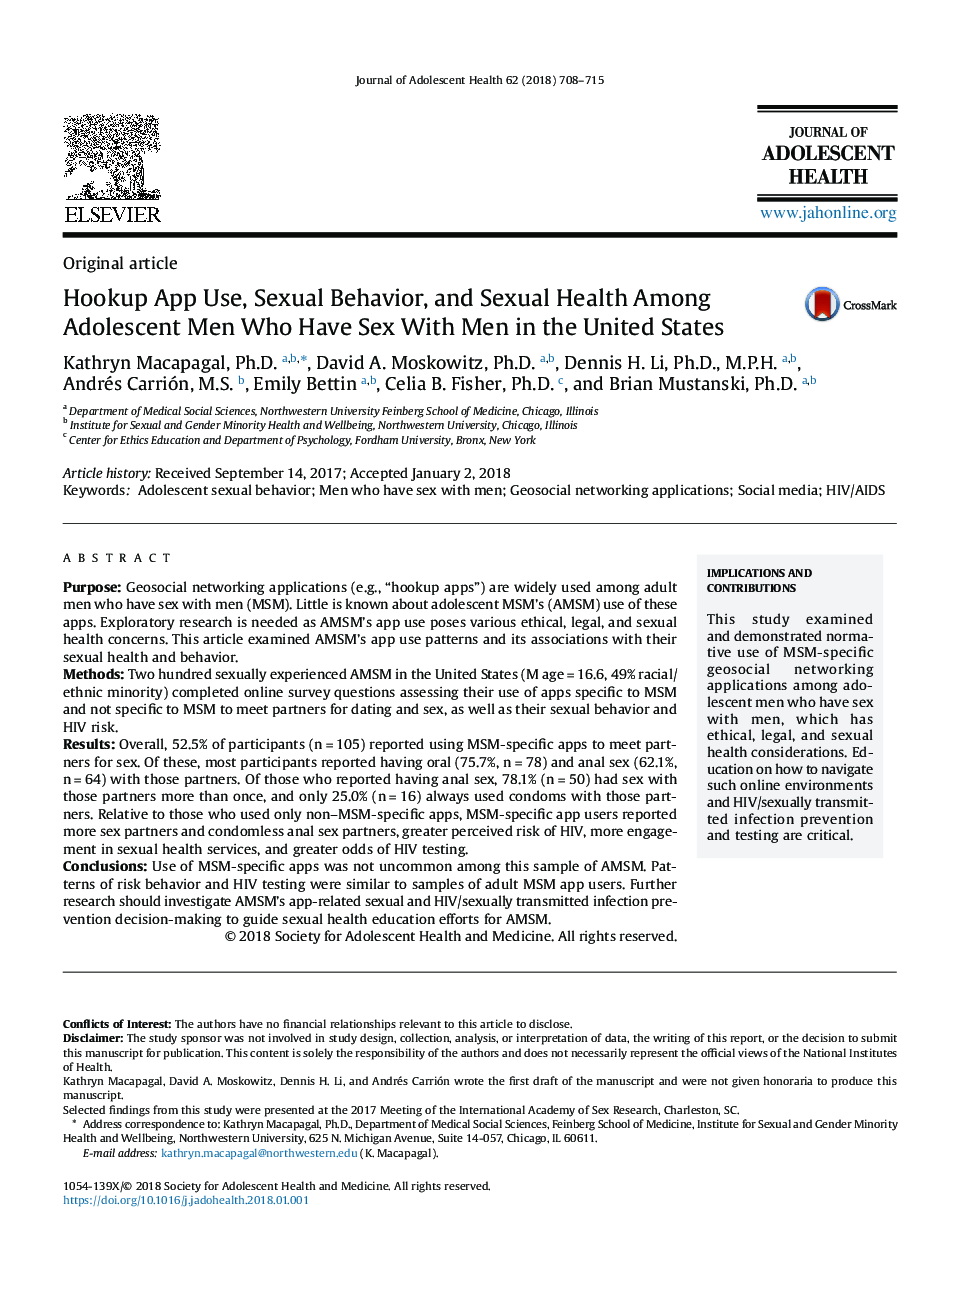 Hookup App Use, Sexual Behavior, and Sexual Health Among Adolescent Men Who Have Sex With Men in the United States